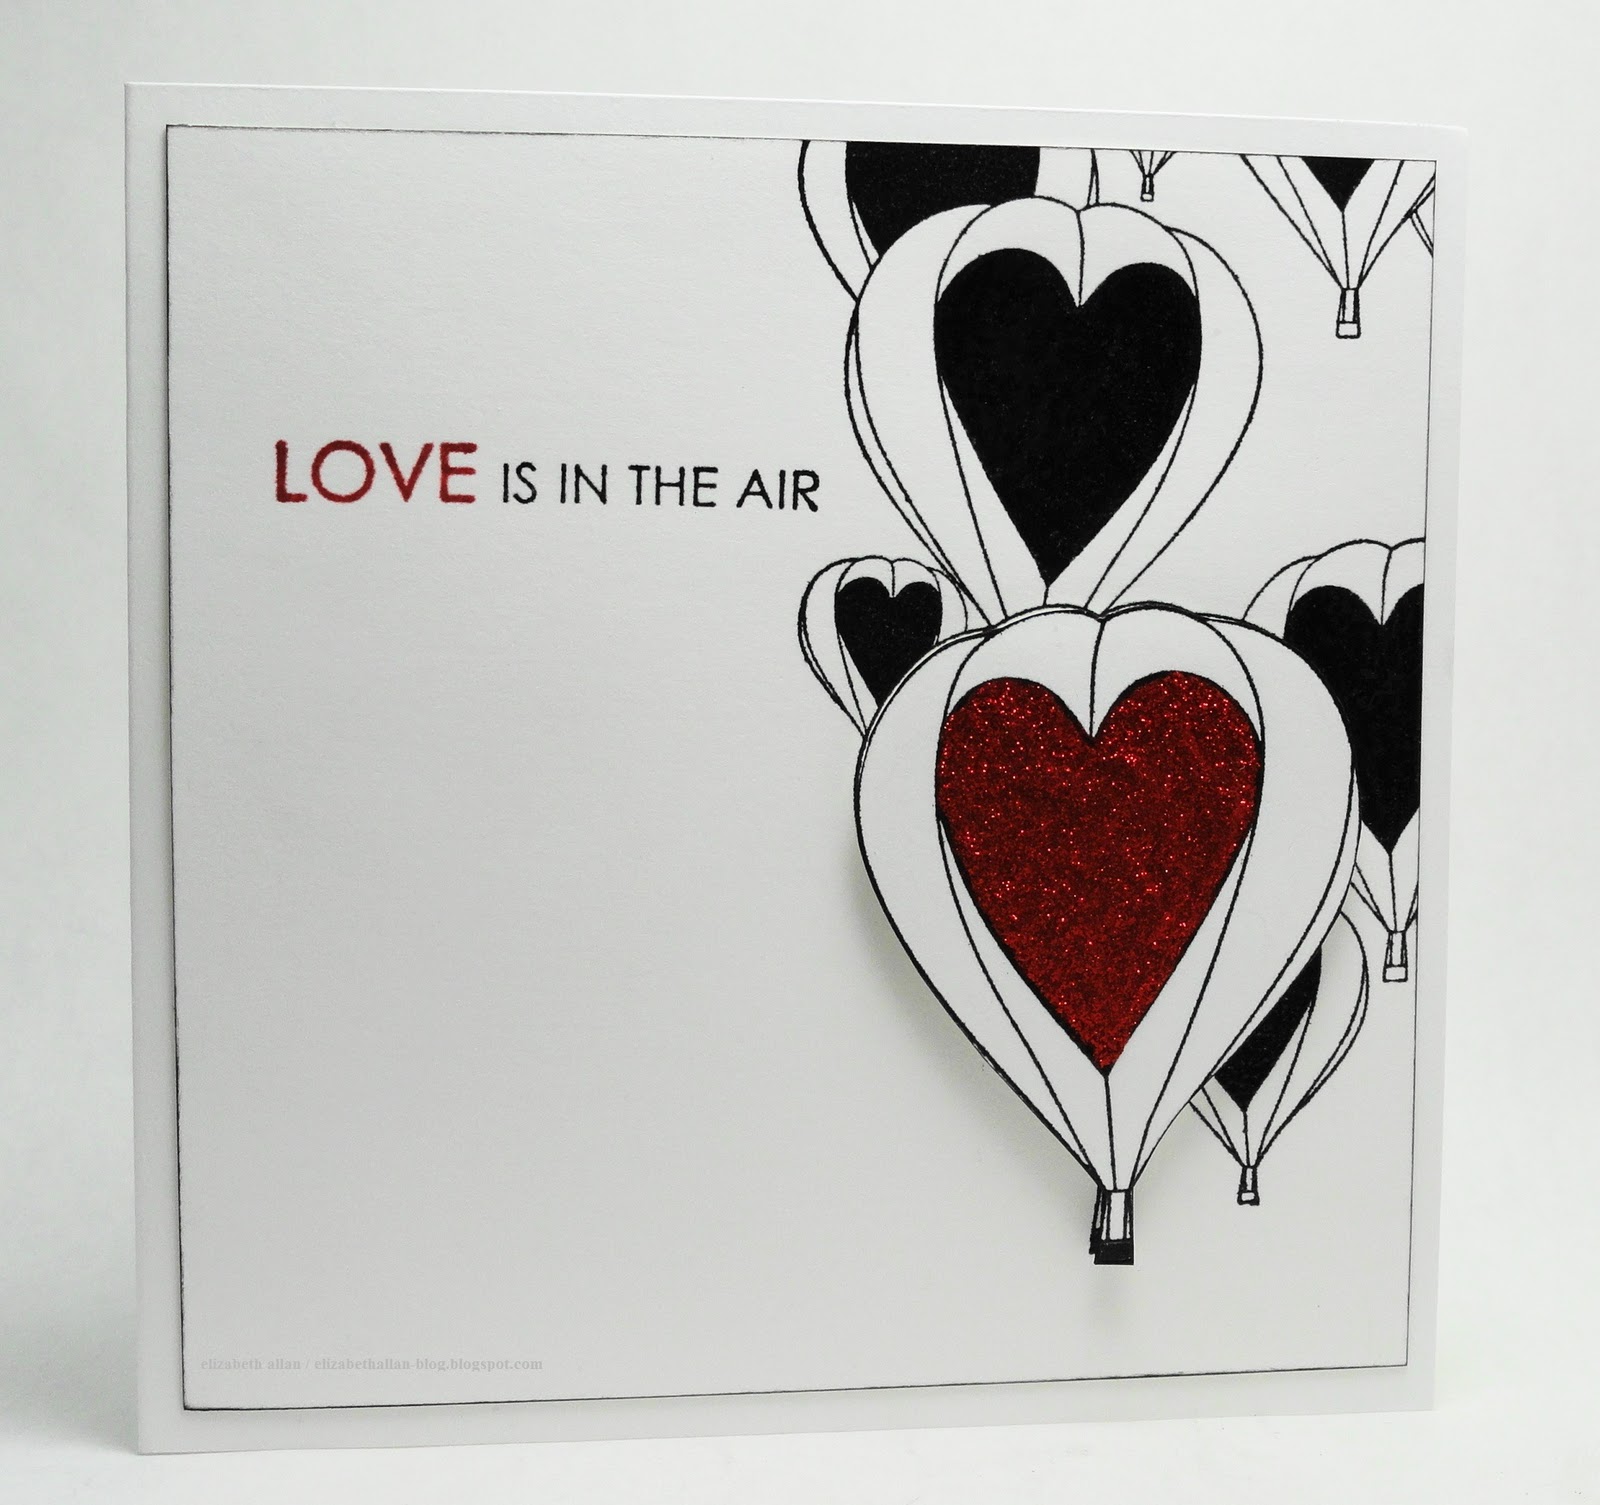 Аир лов. Love is the Air. Love is on the Air. Love is Cards. Блокнот Love is in the Air.